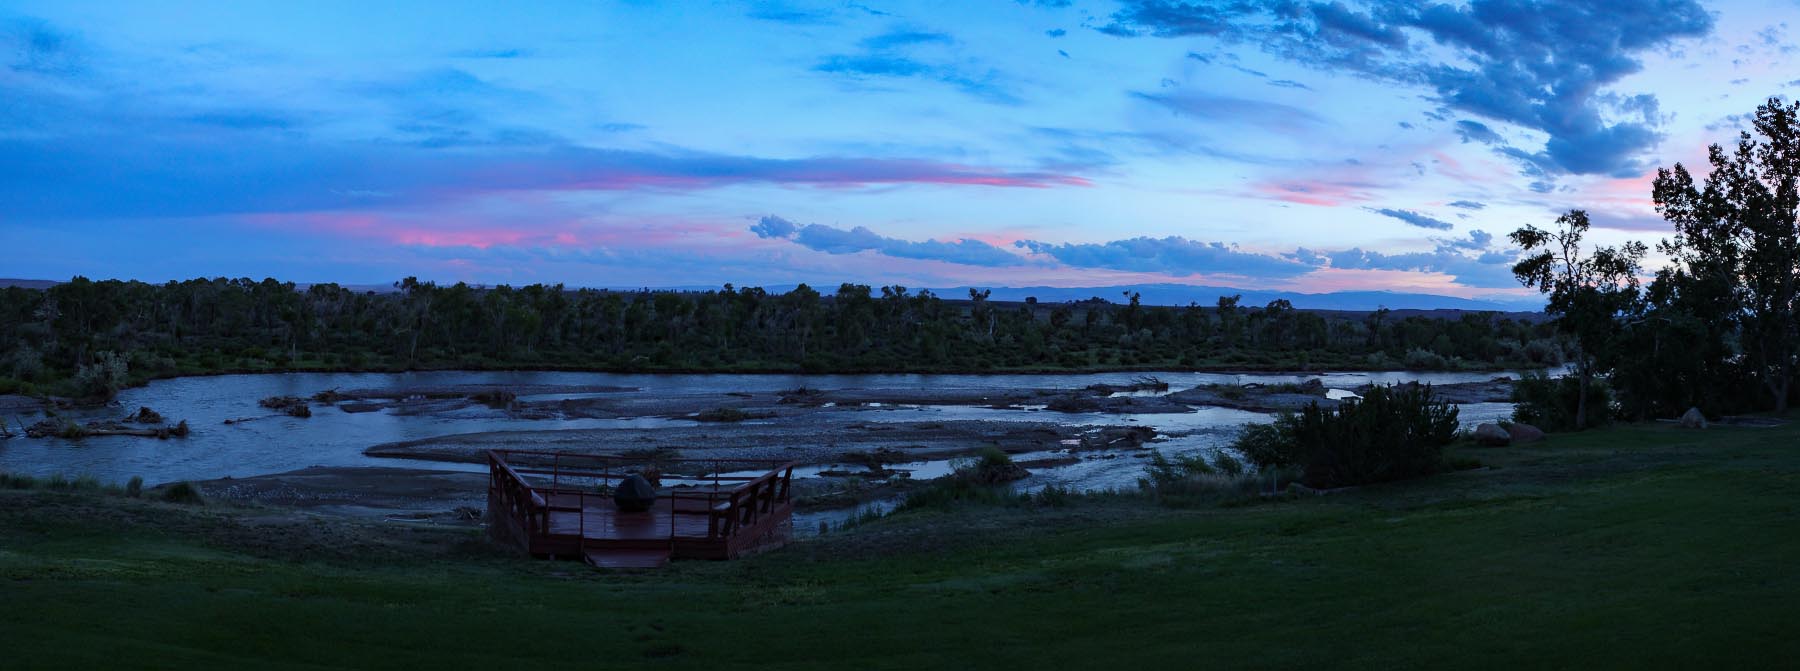 Wind River sunset pano